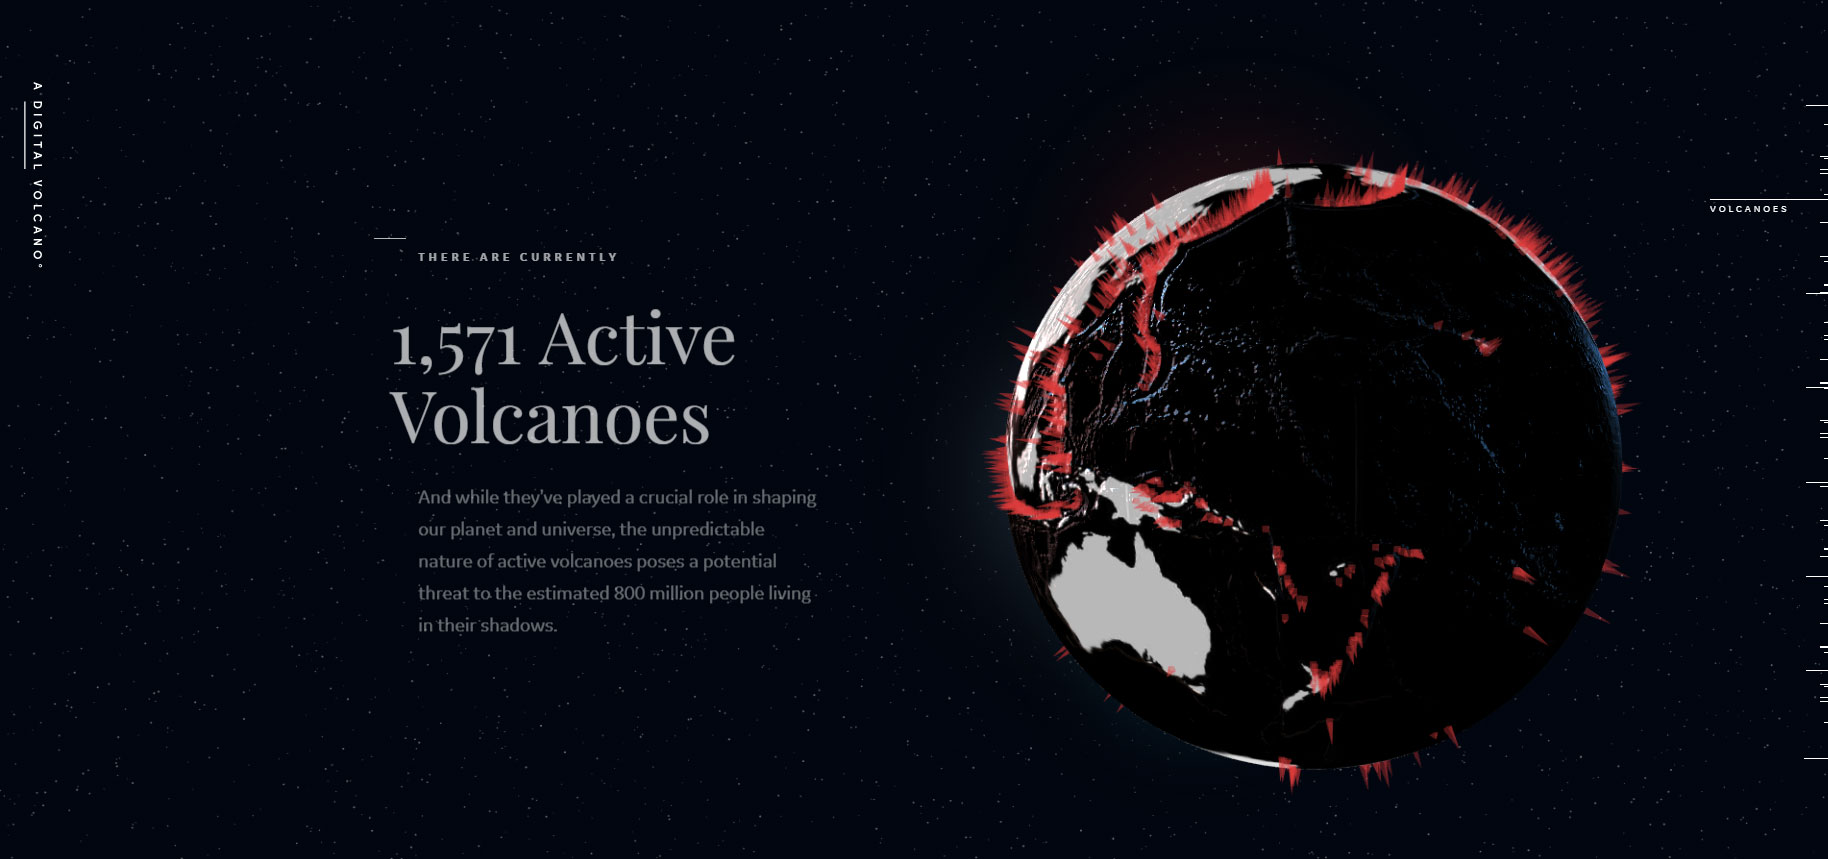 A Digital Volcano - Website of the Day